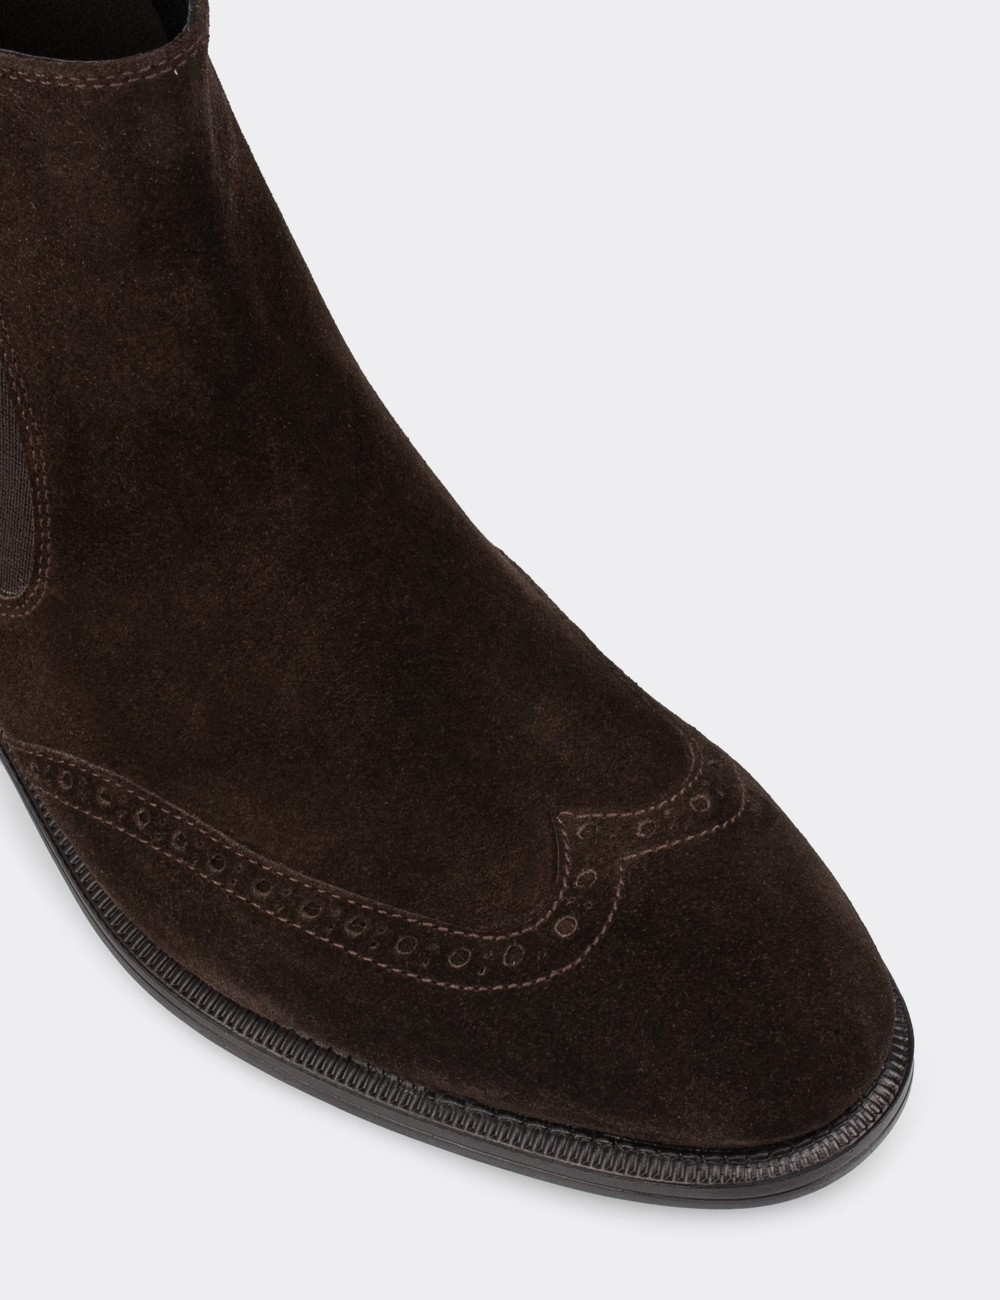 Brown Suede Leather Boots - 01848MKHVC01